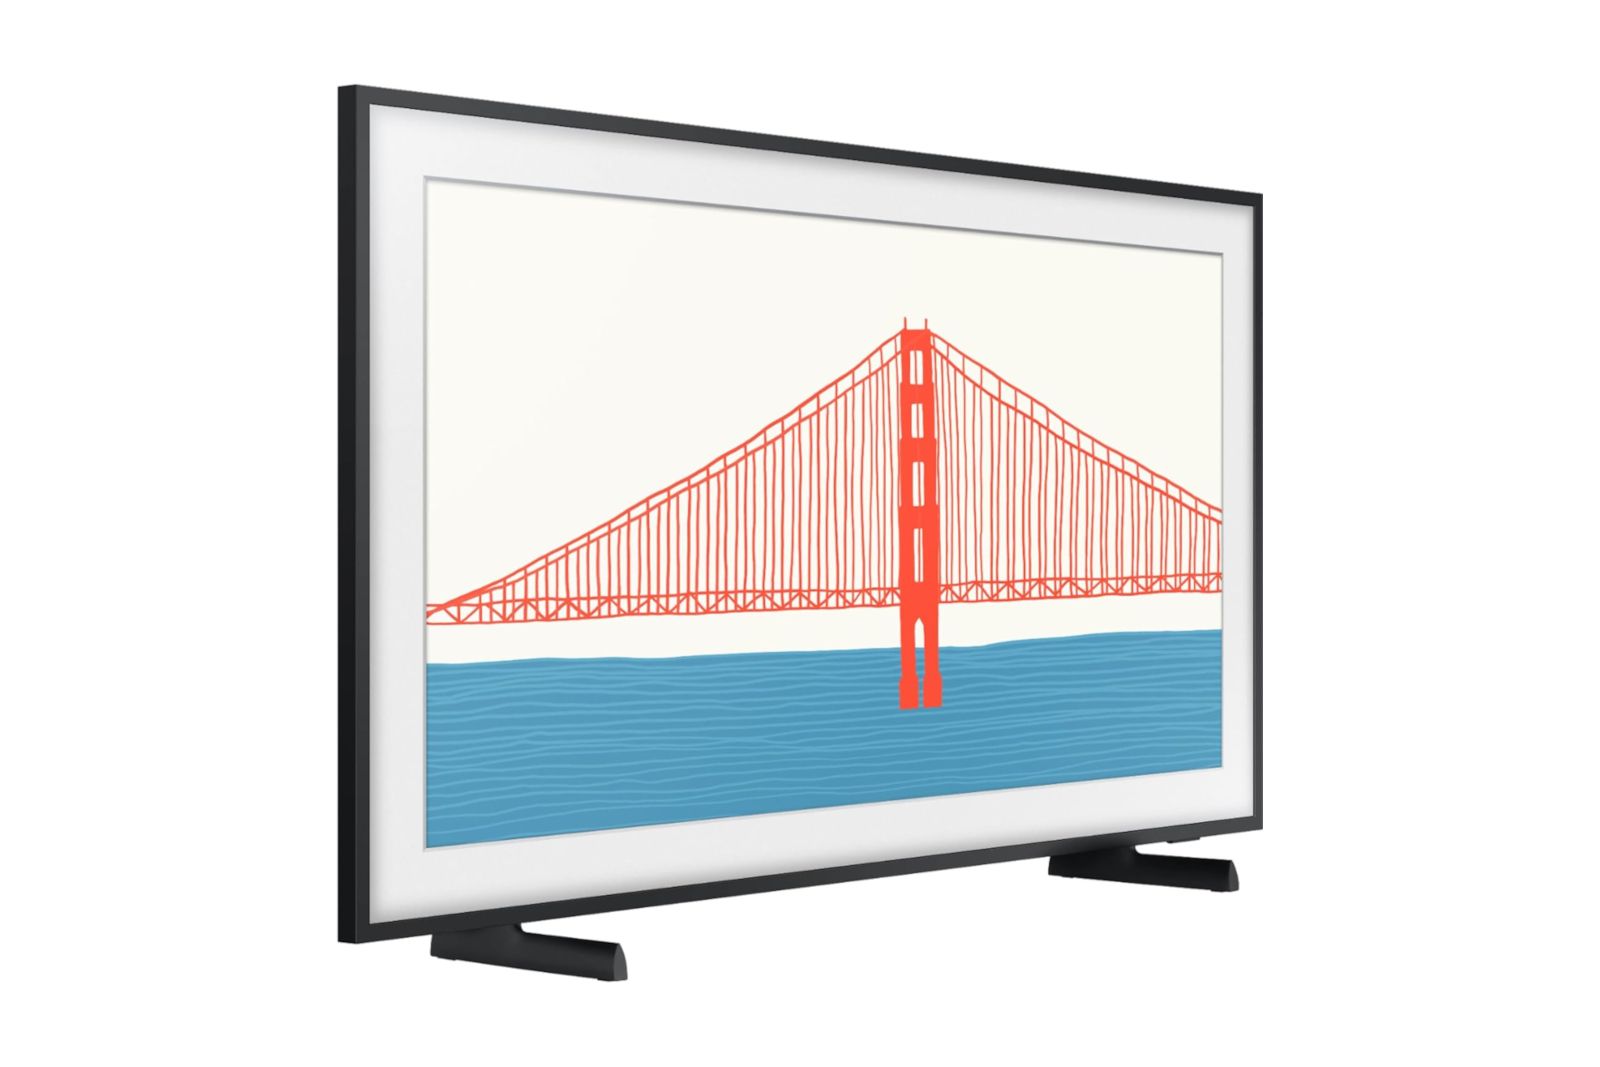 Samsung the frame series 43 inch smart tv